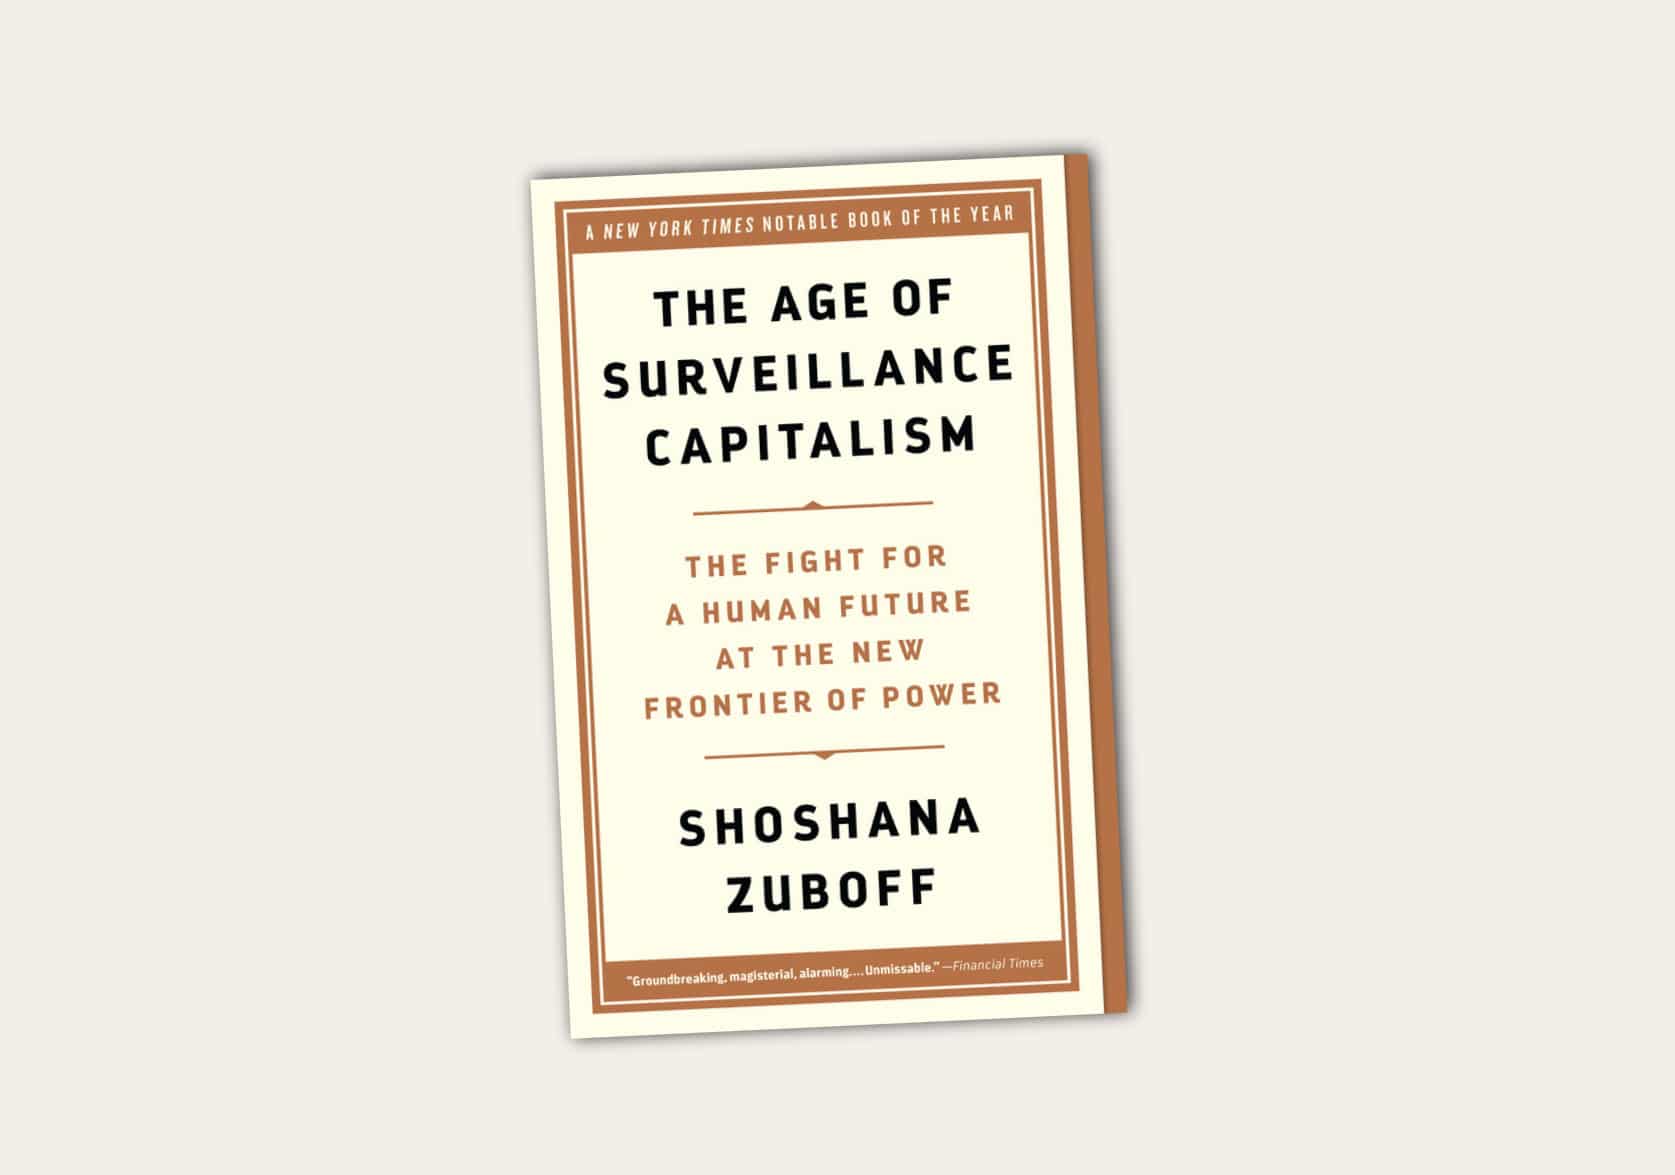 The Age of Surveillance Capitalism: The Fight for A Human Future at the New Frontier of Power by Shoshana Zuboff